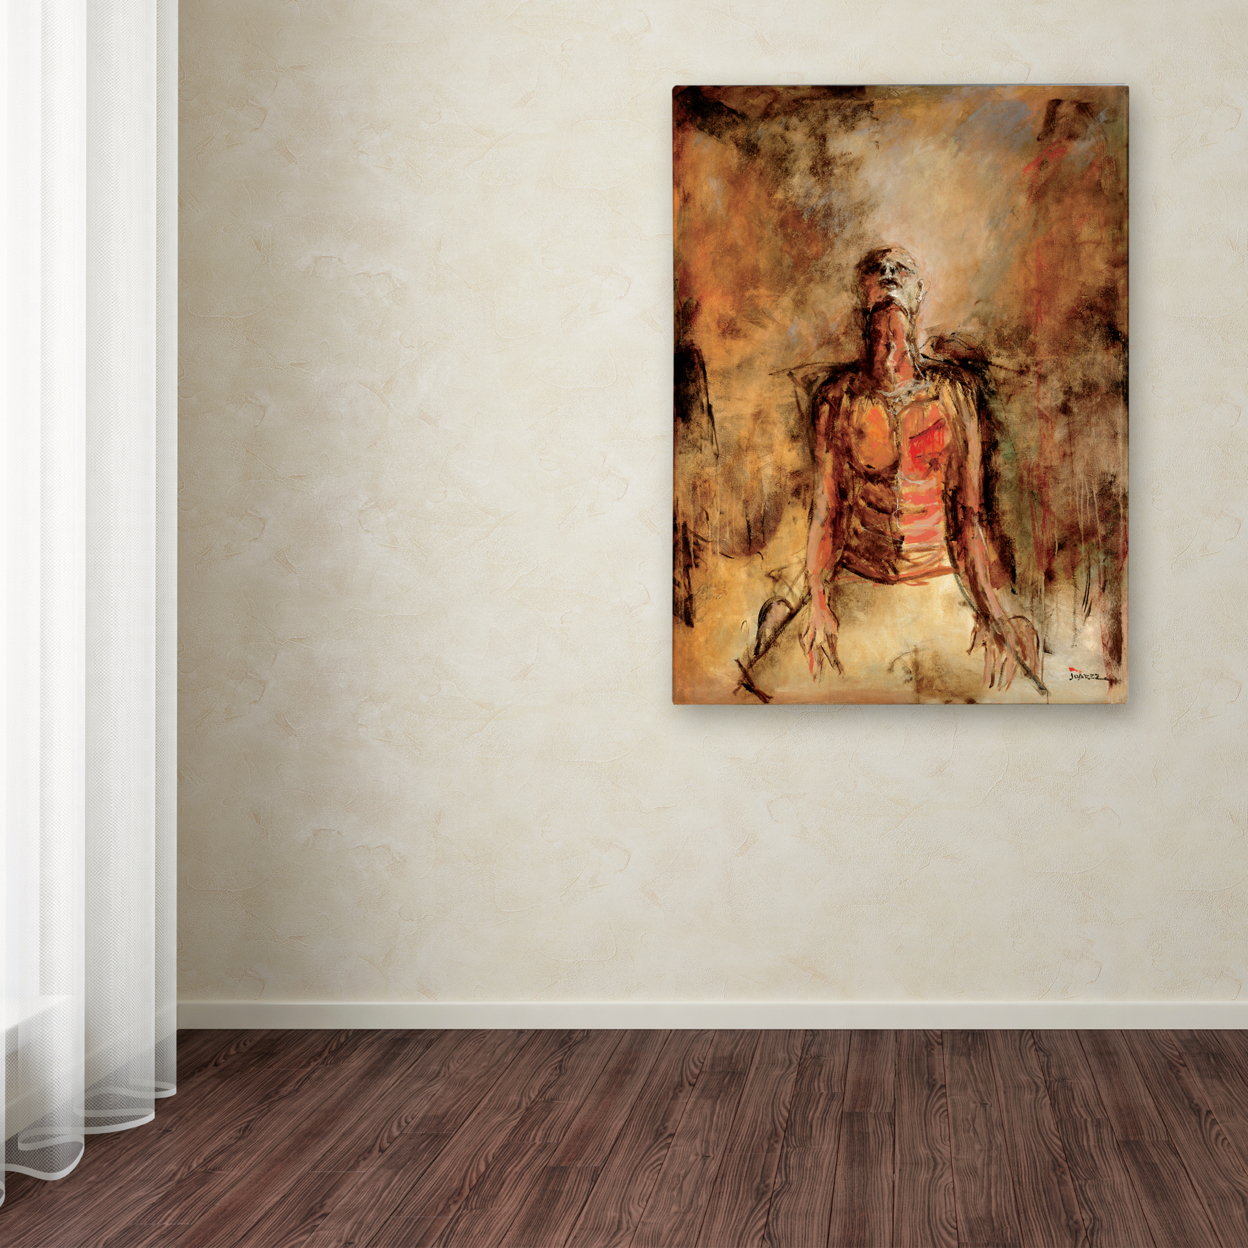 Joarez 'Totally Surrender' Canvas Wall Art 35 X 47 Inches